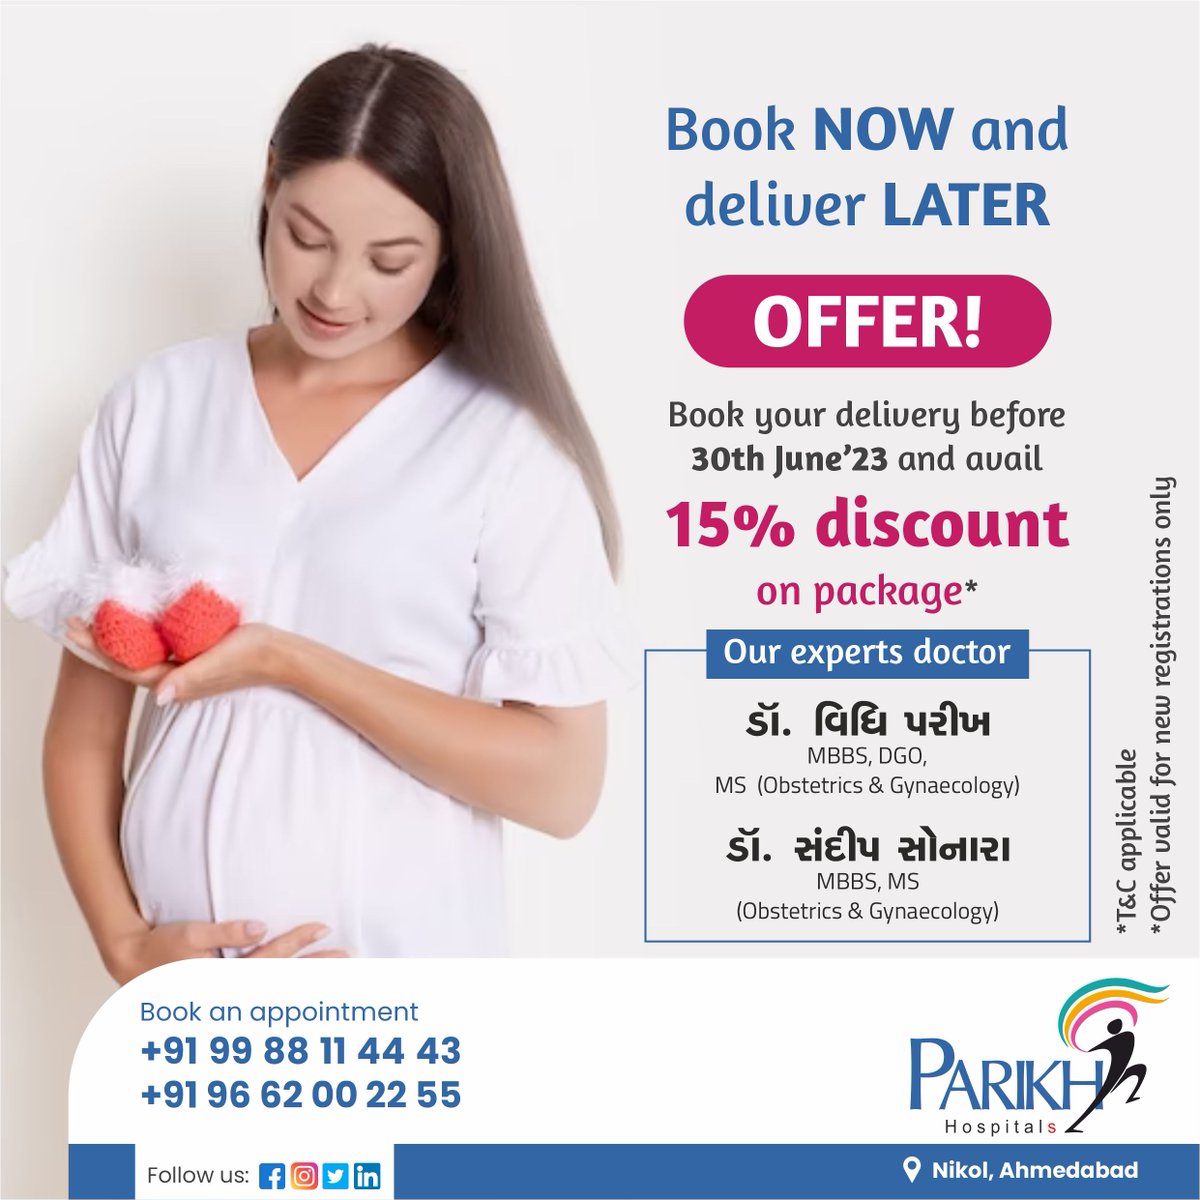 Book Now and deliver Later Book your delivery before 30th June 2023 and avail 15% discount on package* *T&C Applicable *Offer valid for new registrations only Book an appointment +91 99 88 11 44 43 / +91 96 62 00 22 55 #ParikhHospitals #nikol #offer #ivfpackage #gyneccare